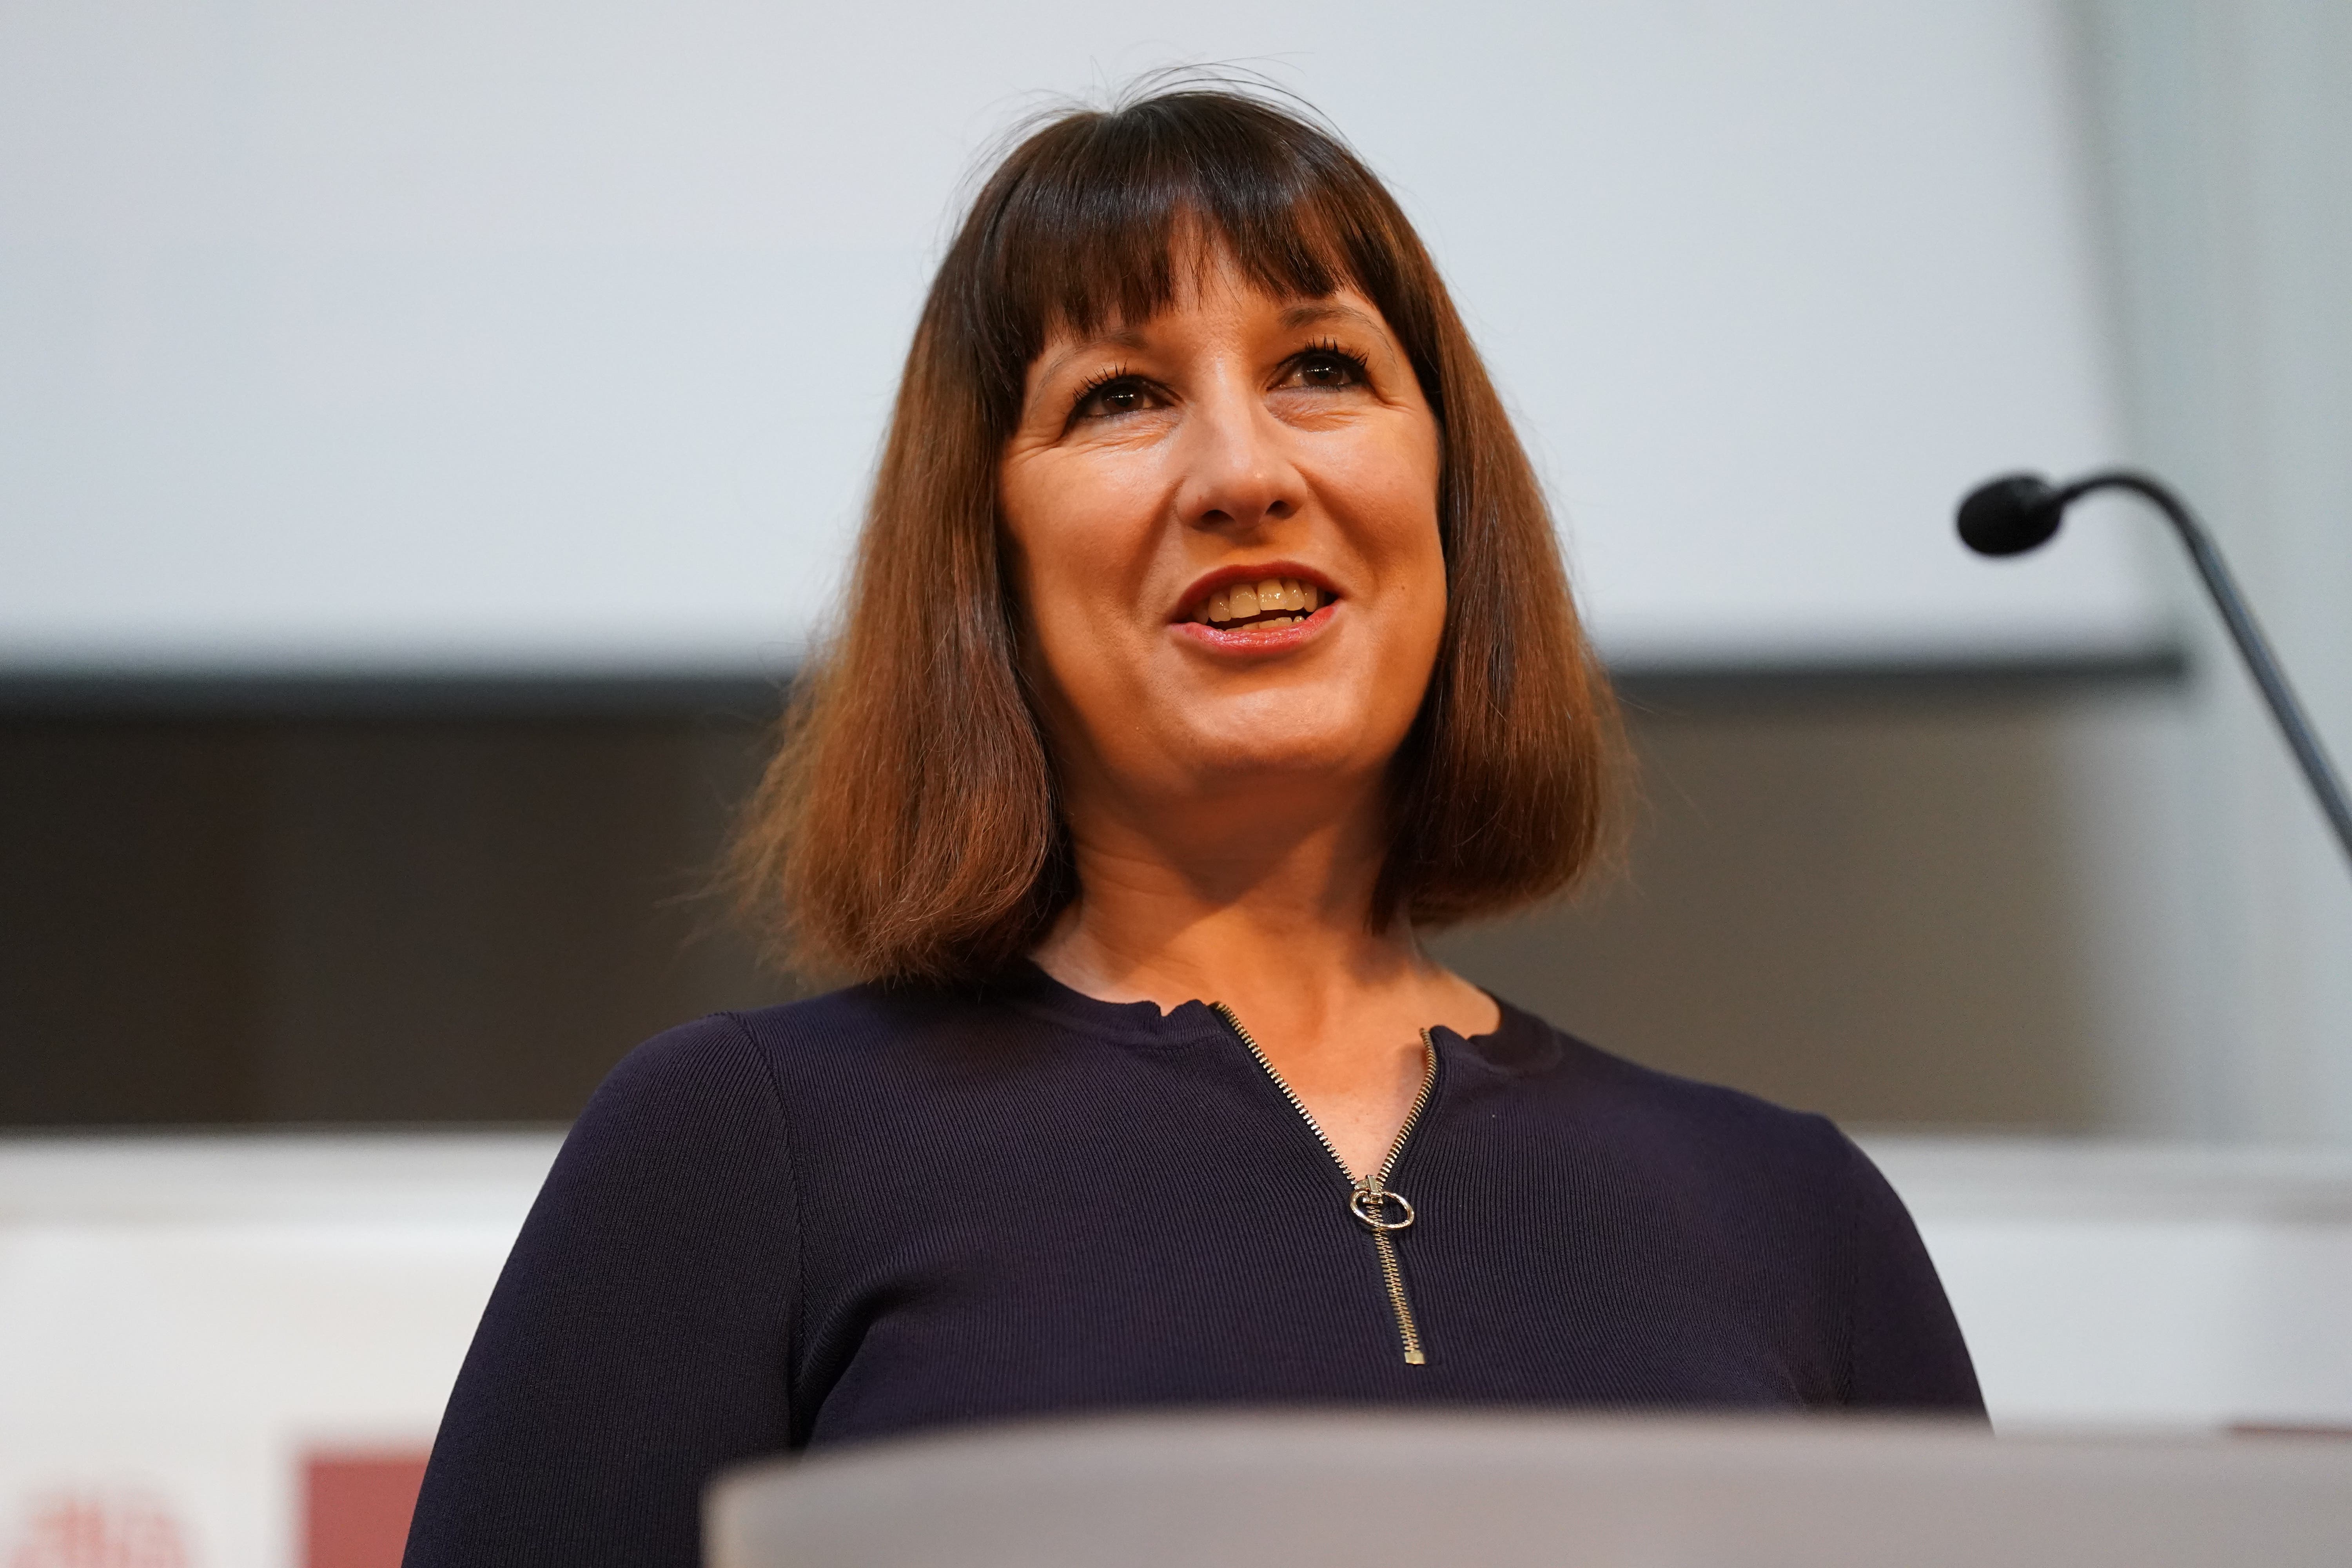 Shadow chancellor Rachel Reeves is set to announce a business tax review under a future Labour administration (Kirsty O’Connor/PA)